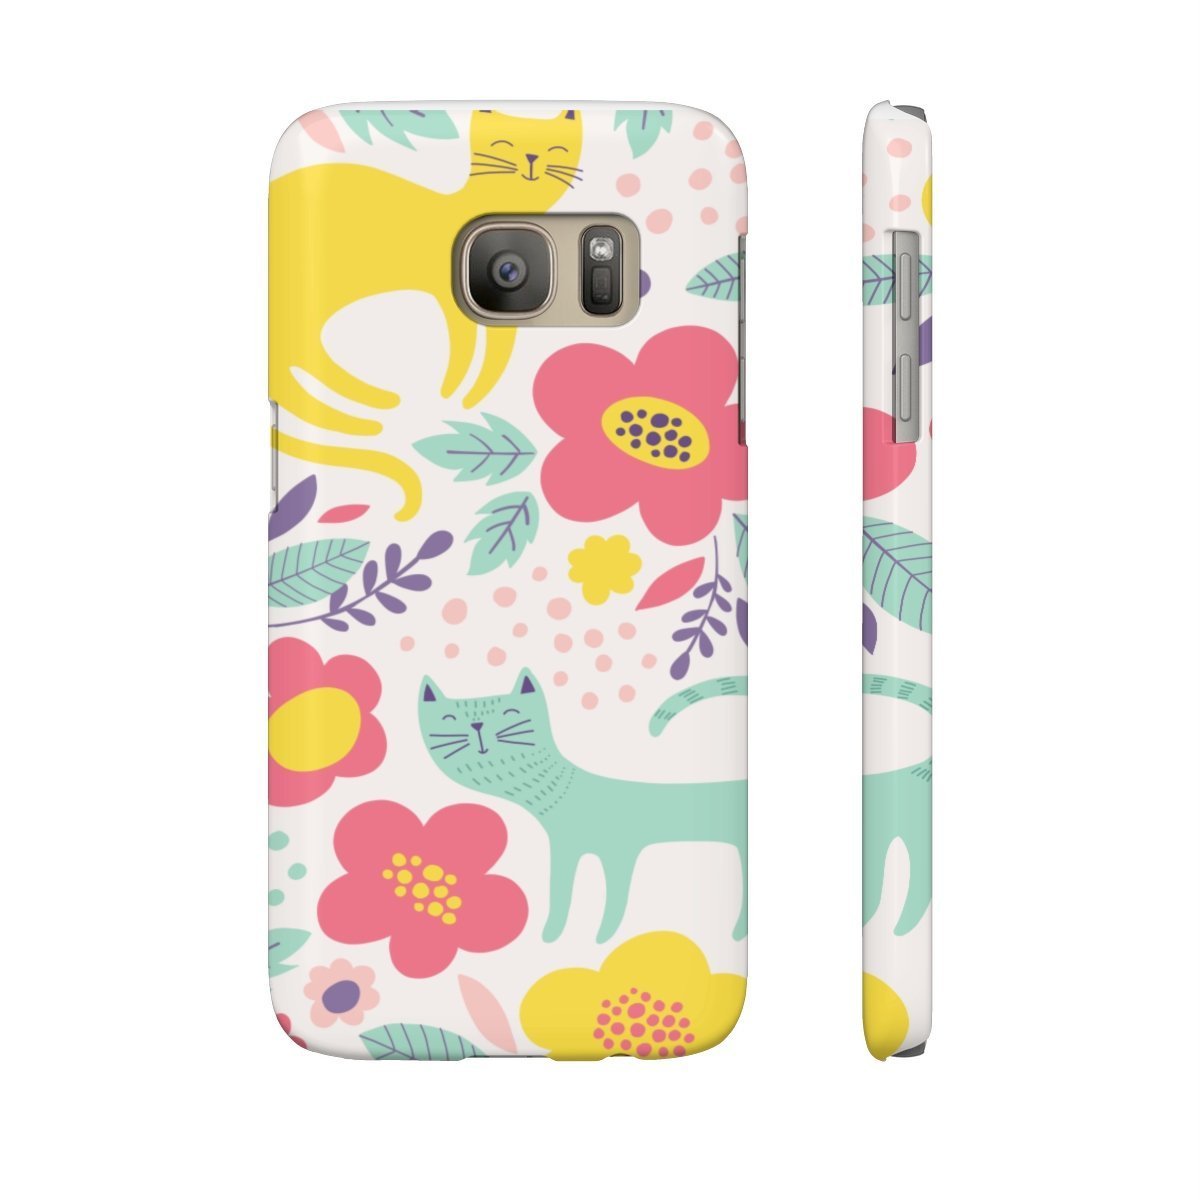 Cat Design Gifts for Cat Lovers, Floral Cat Phone Case with a One of a Kind Cat Themed Design